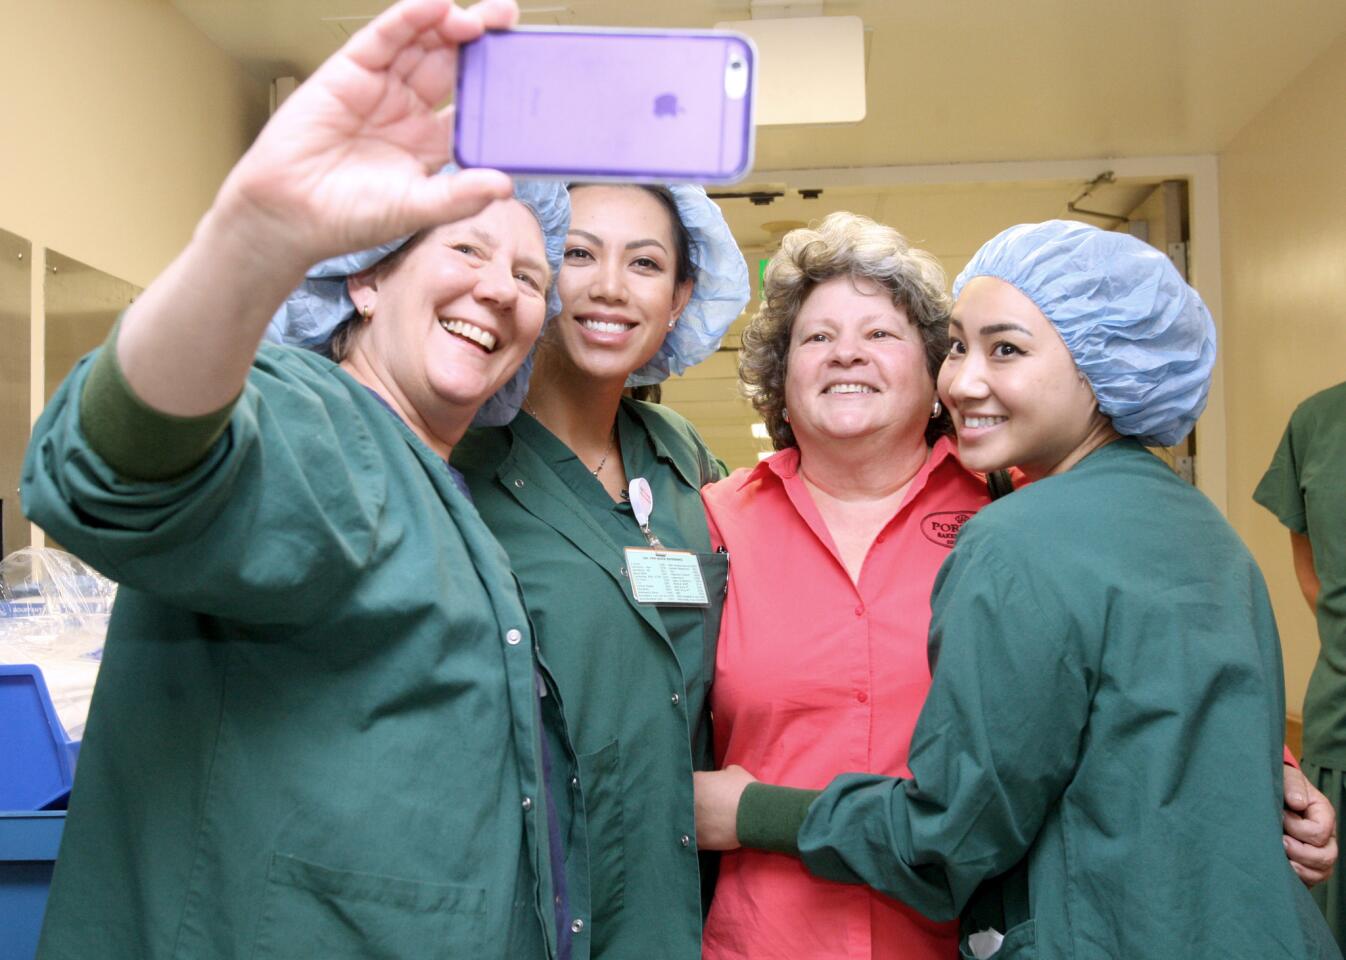 Photo Gallery: Porto's Bakery Betty Porto helps kick off Nurses Week with free lunch for nurses at USC Verdugo Hills Medical Center in Glendale